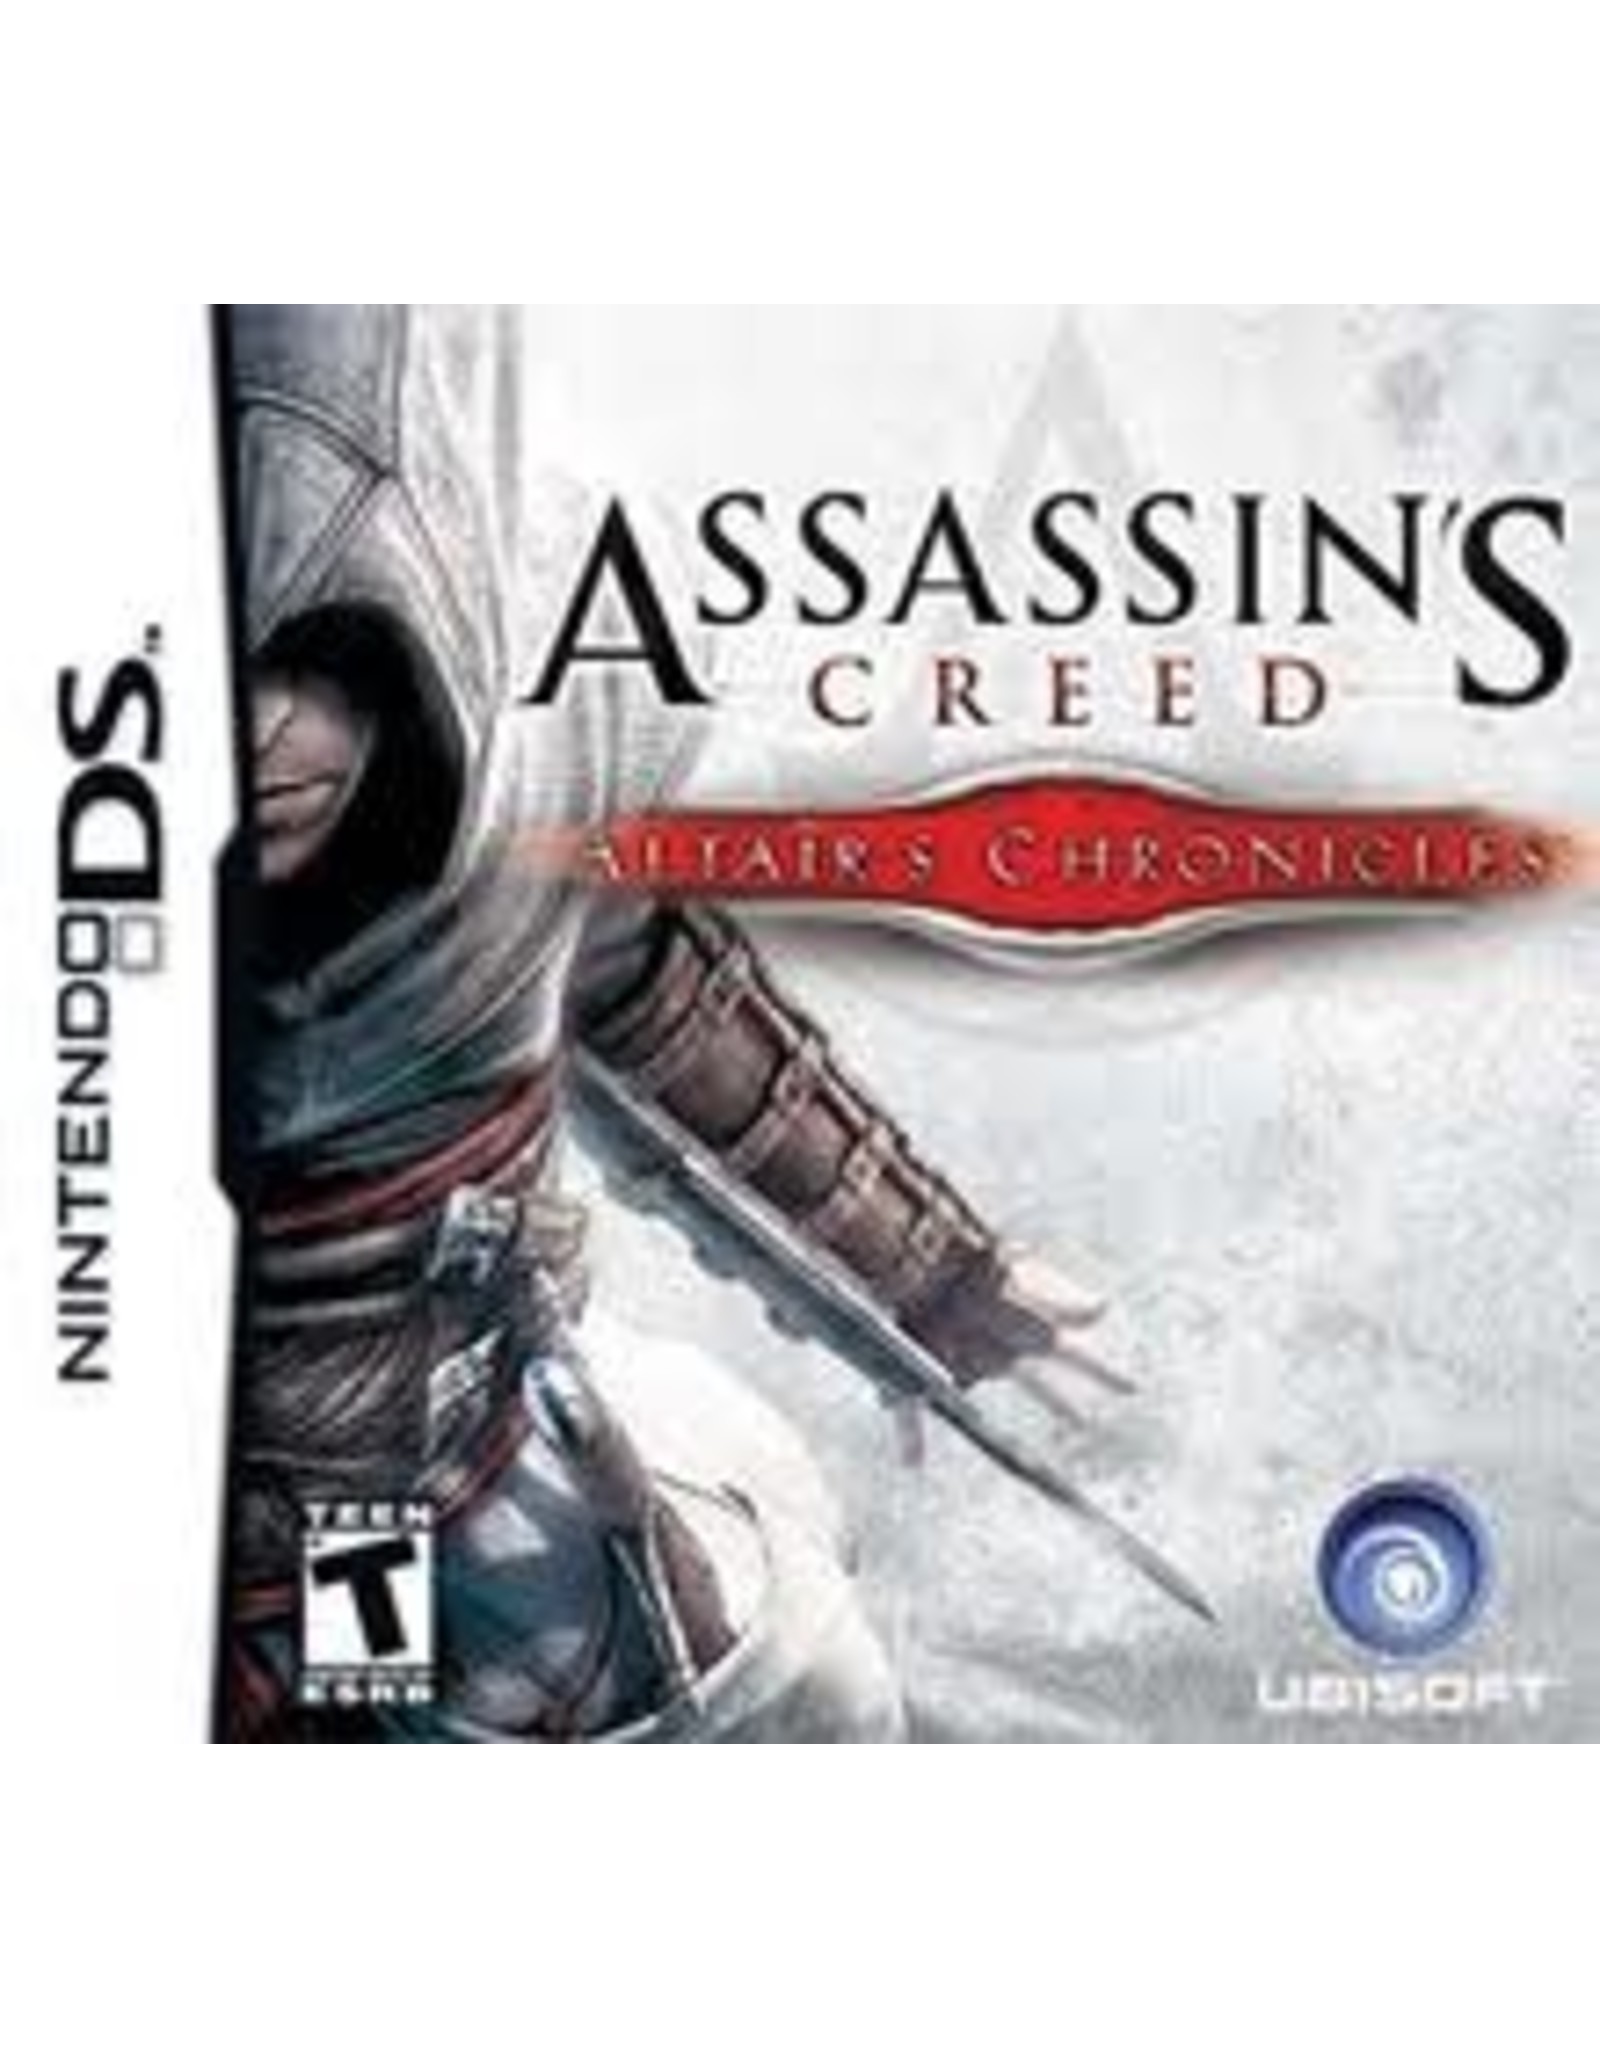 Nintendo DS Assassin's Creed Altair's Chronicles (CiB)